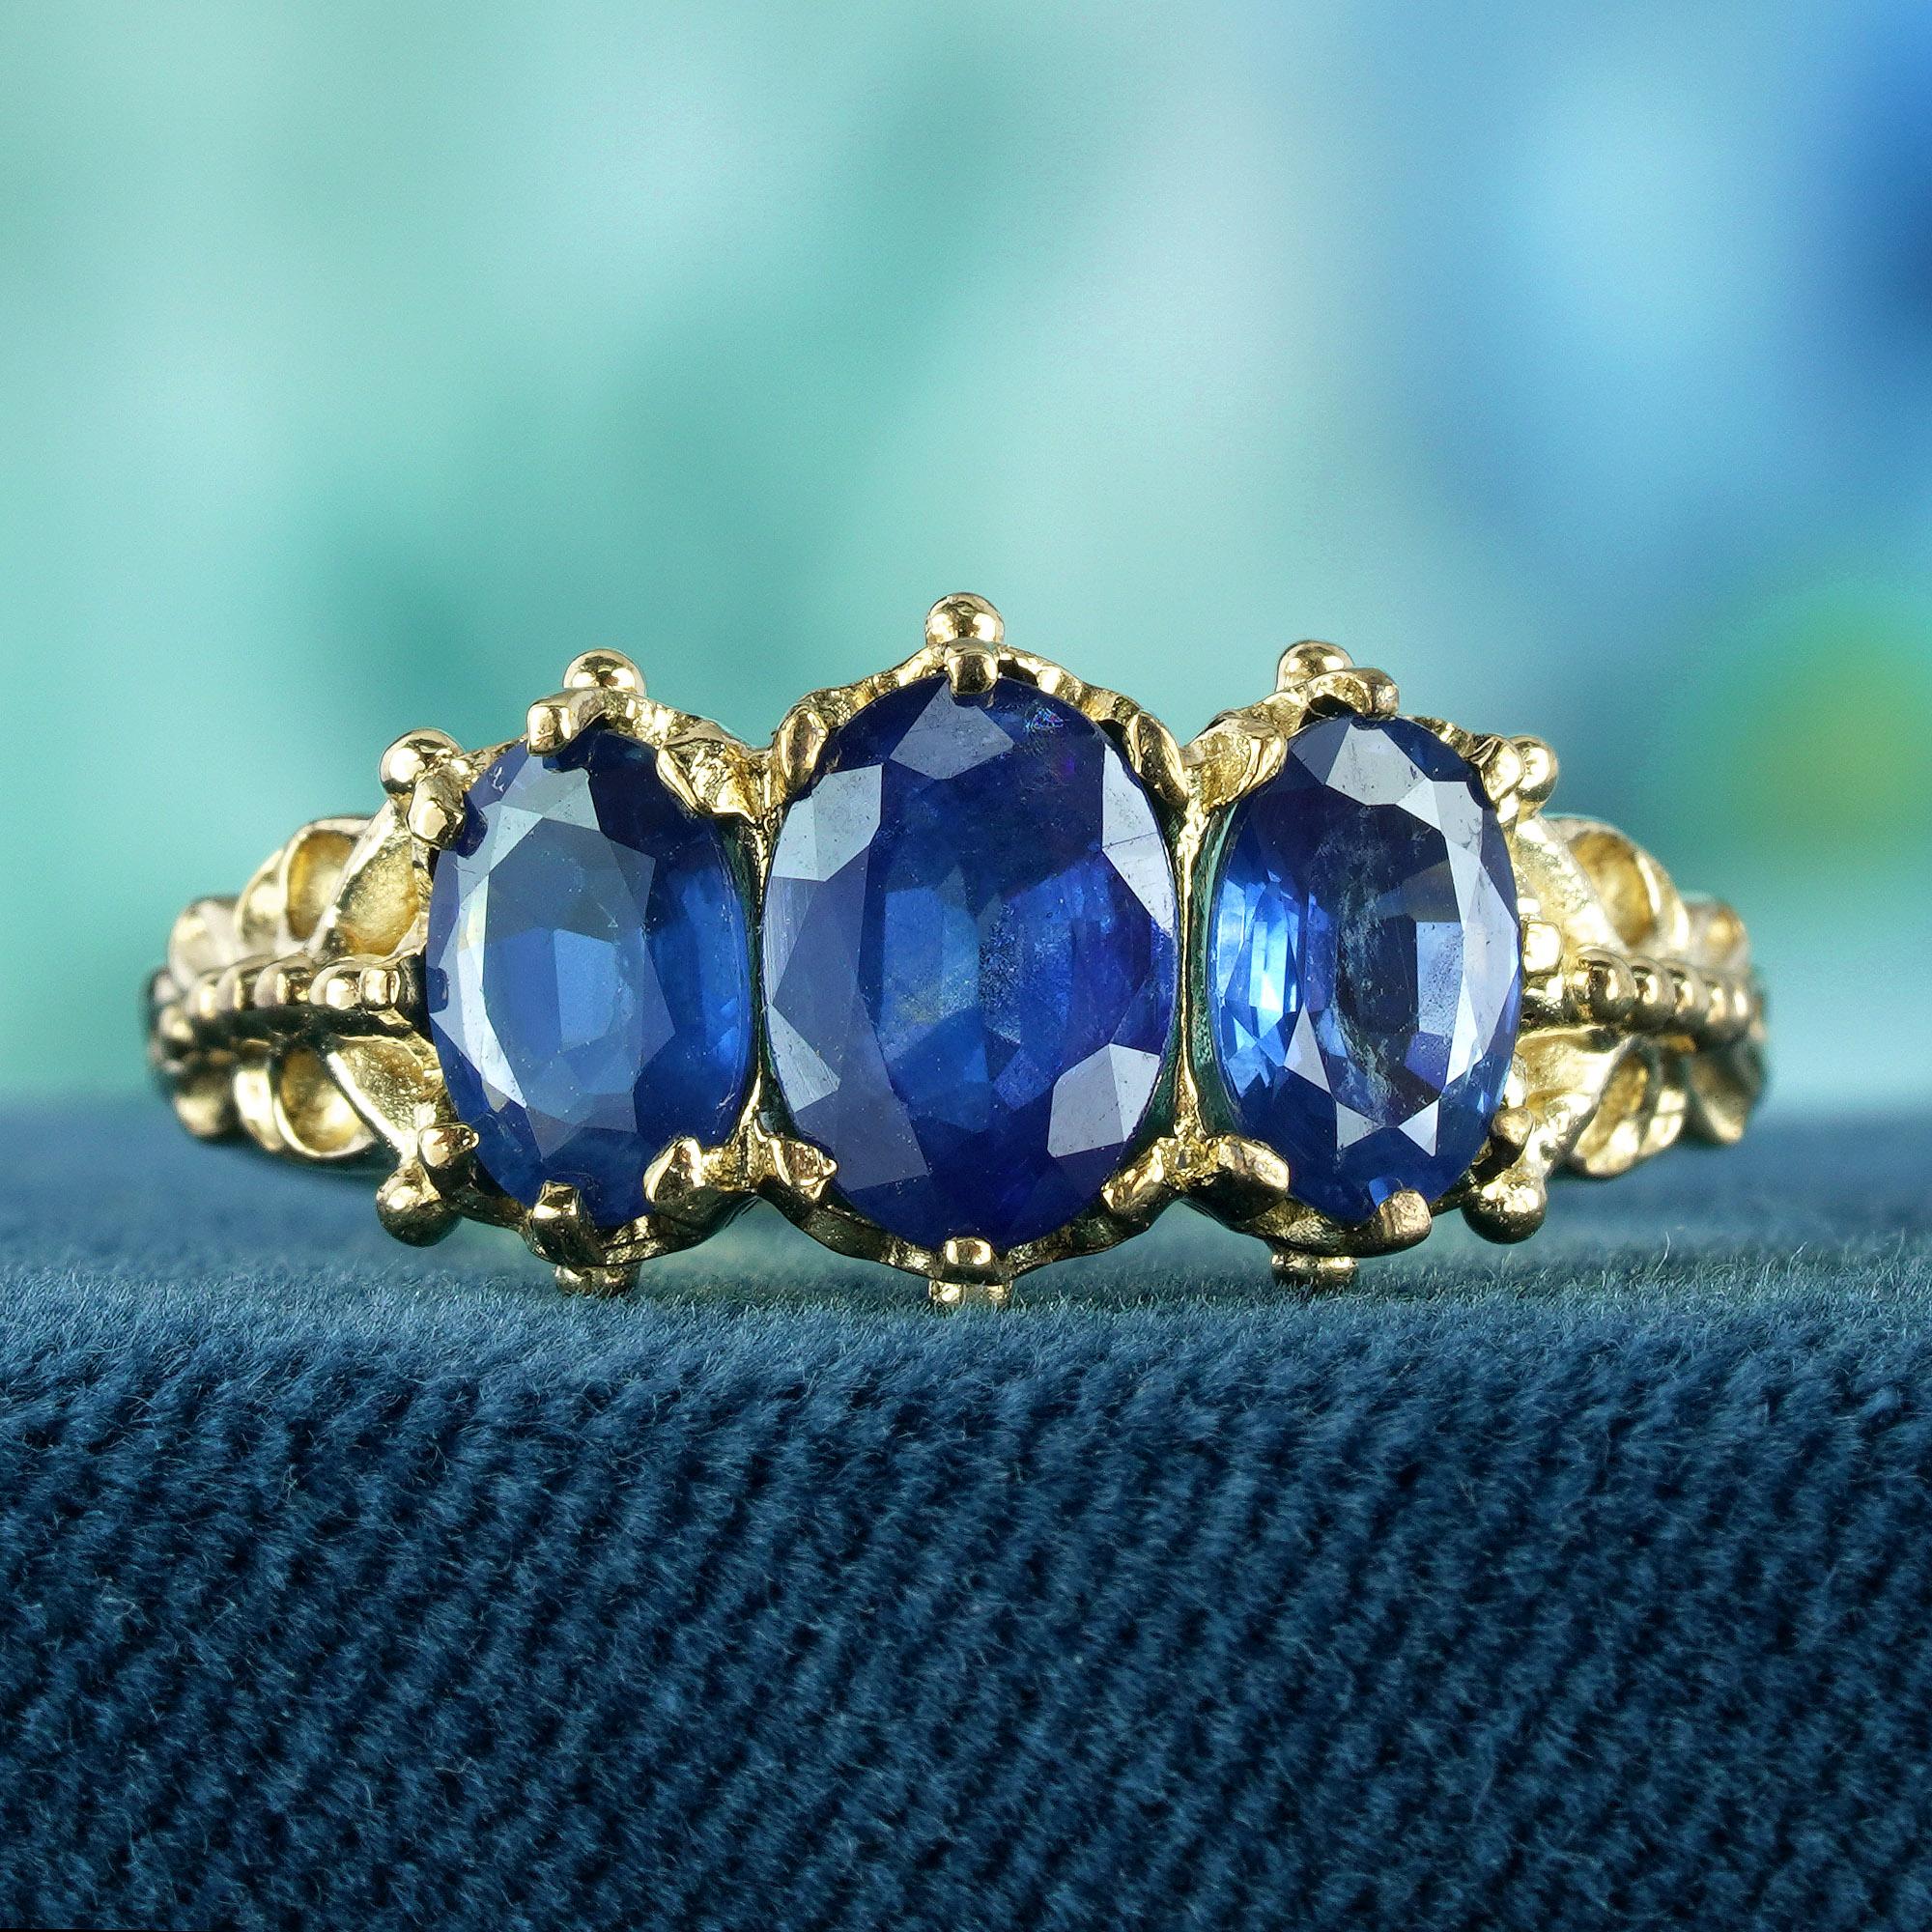 This ring showcases three natural blue sapphires, each with a captivating deep blue hue and a faceted oval cut, ensuring they catch the light and draw eyes. The filigree band crafted from yellow gold exudes a warm and enduring aesthetic. This